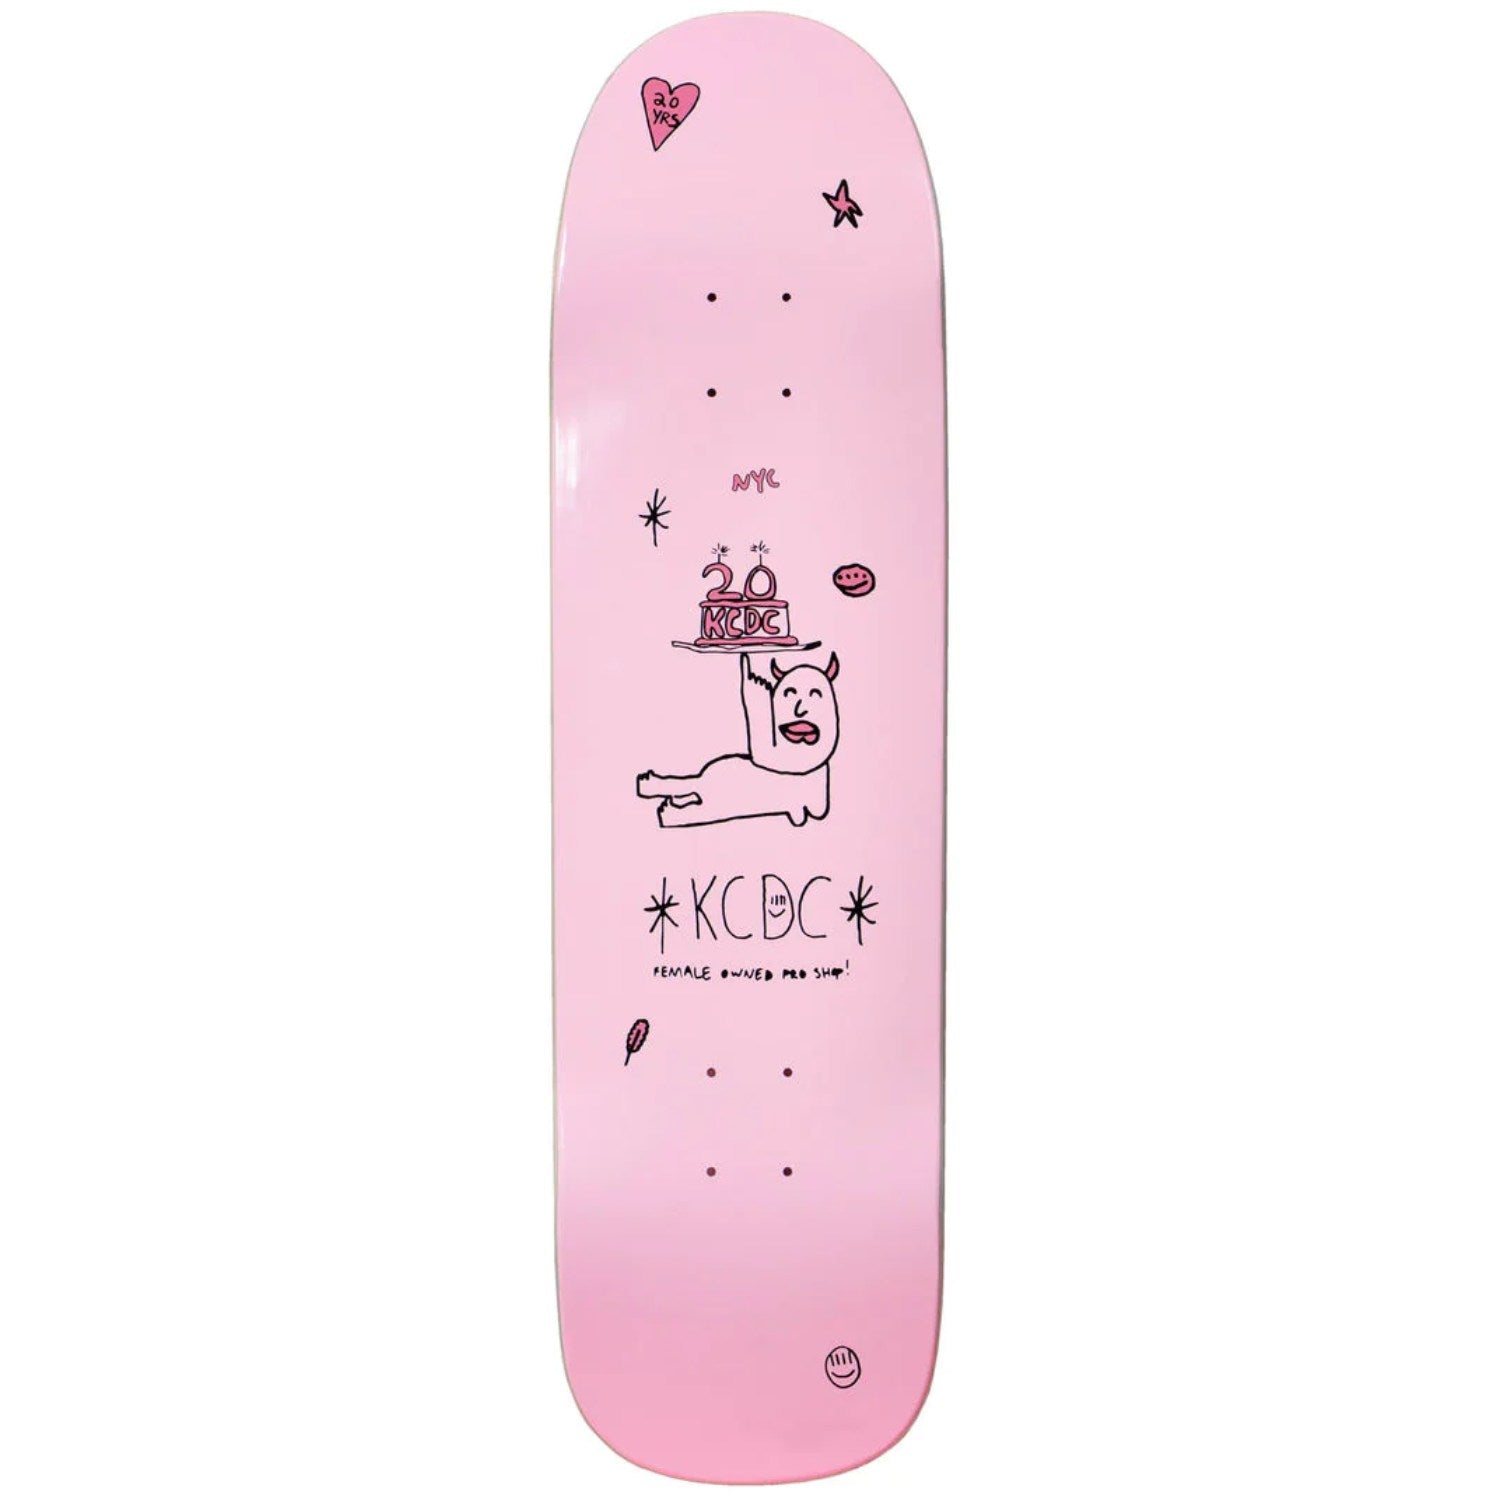 KCDC Deck - 20th Anniversary - Pink